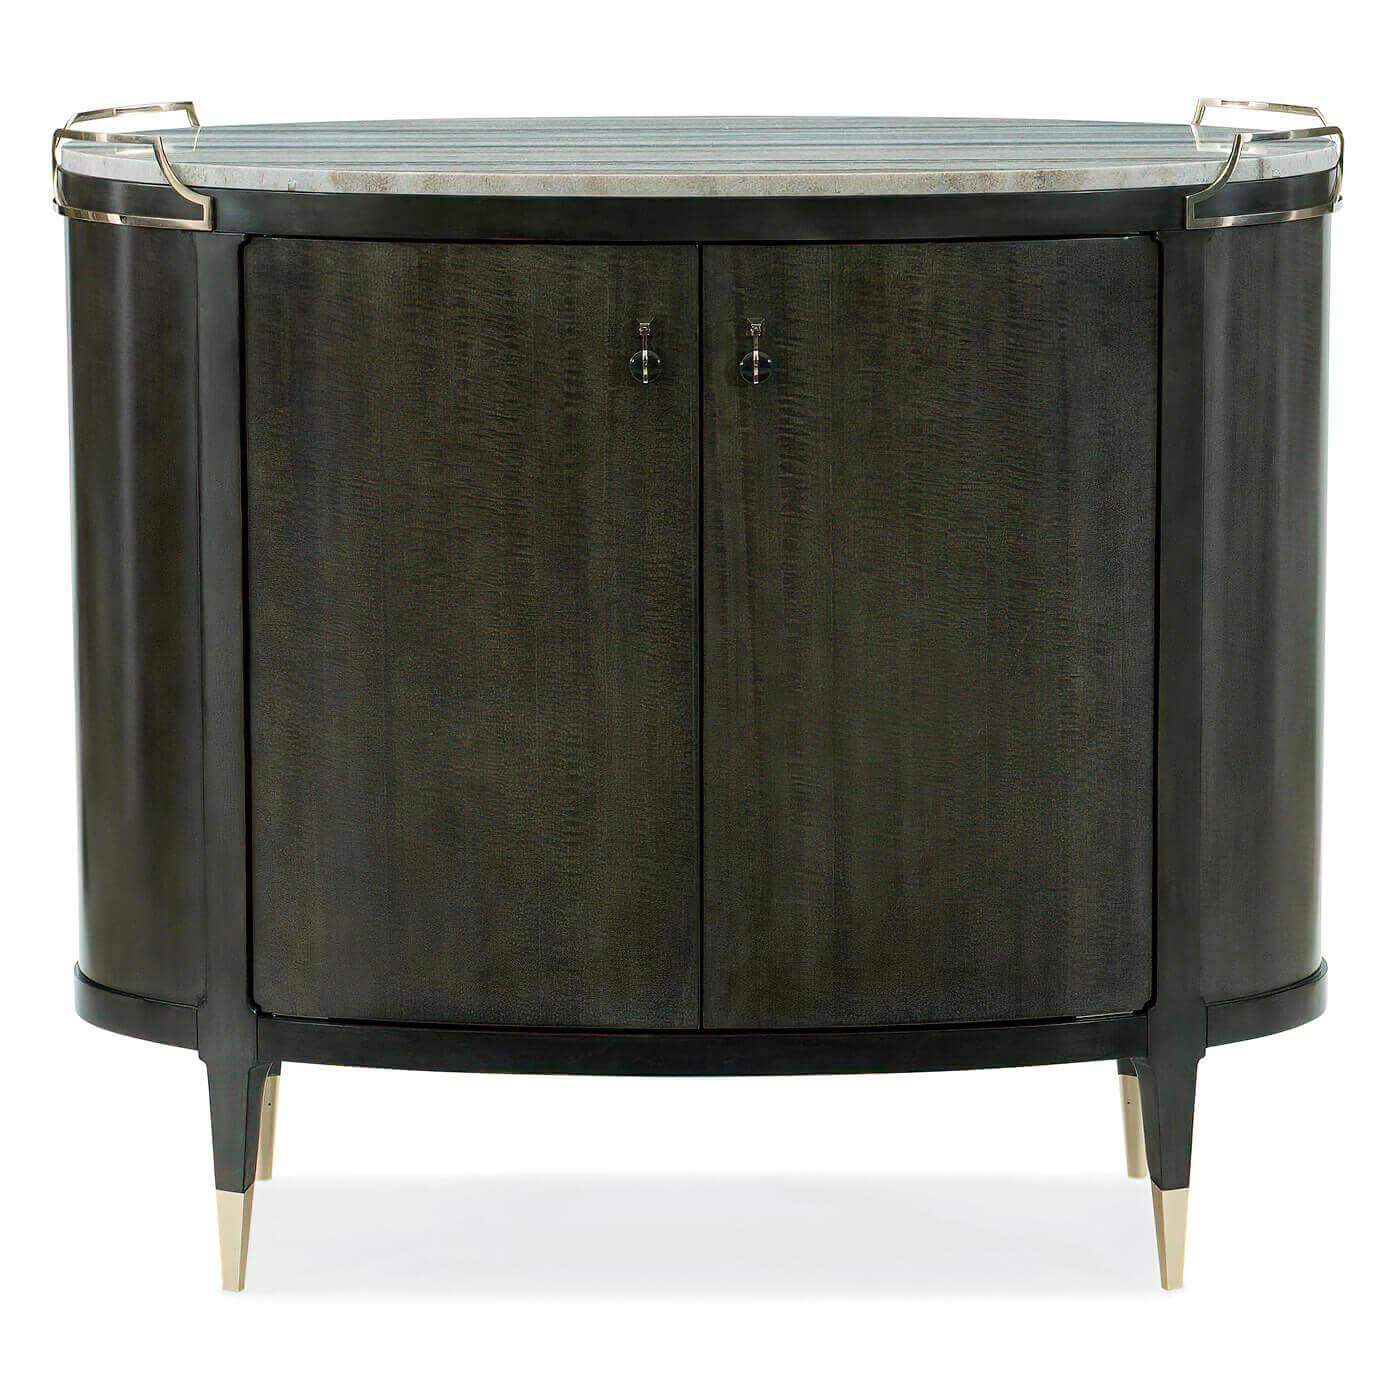 A Mid-Century Modern-Style oval bar cabinet with a striking sandstone top. The elegant top is trimmed with crisscrossing gold finish handles. This beautiful piece is finished all around and has two curved doors with custom metal pulls. The inside